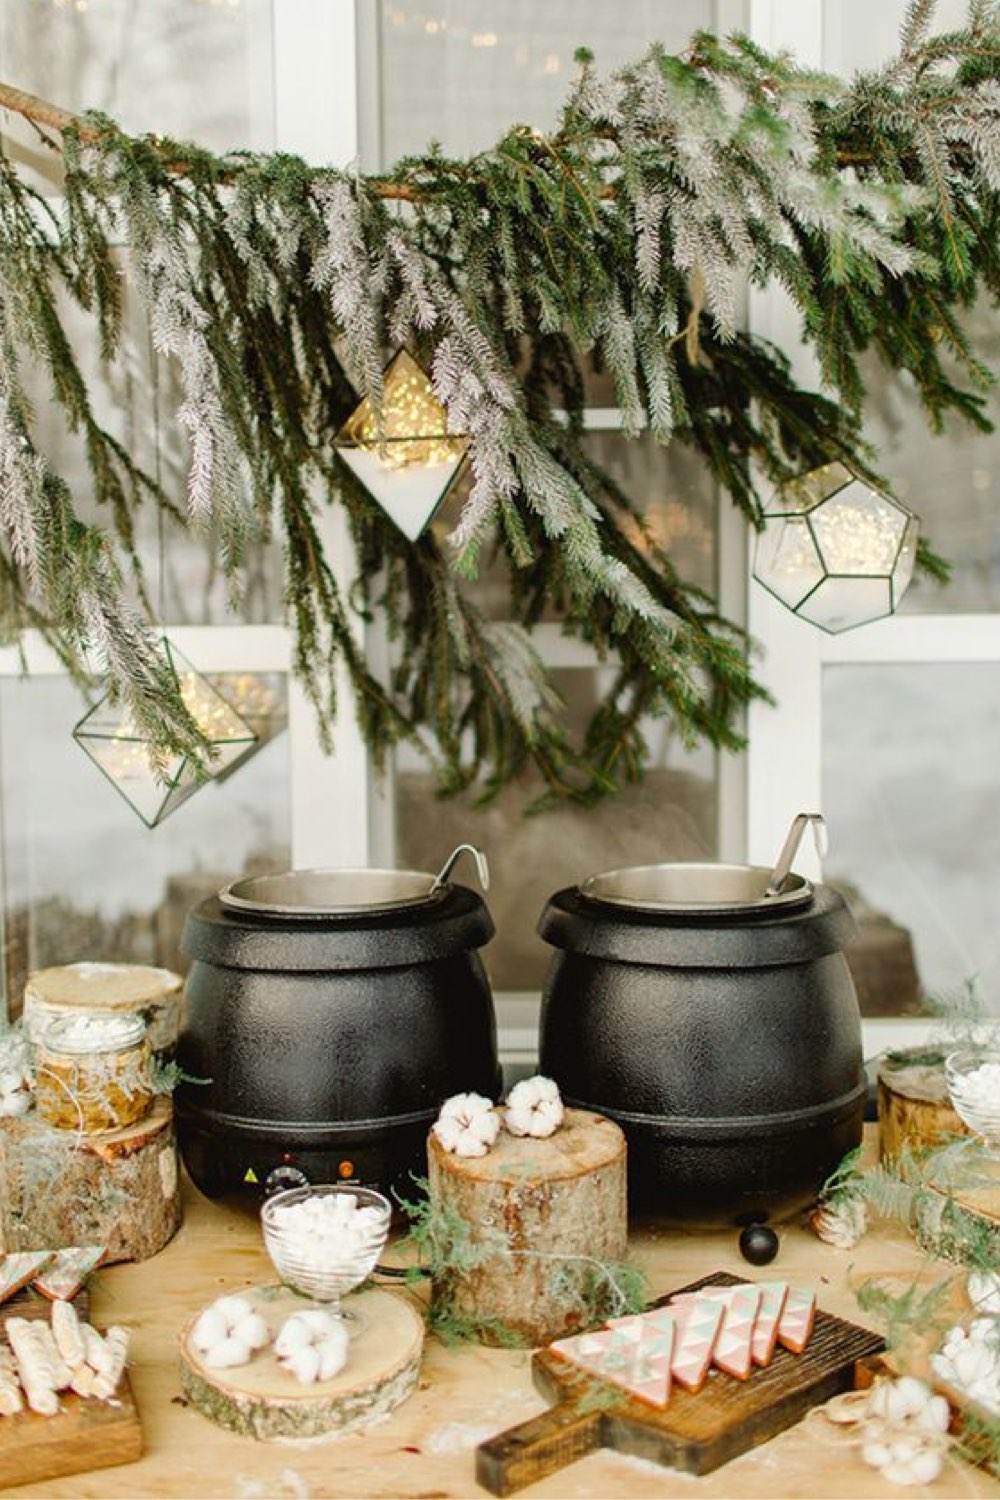 idee decoration mariage hiver présentation buffet plat chaud soupe fromage cosy